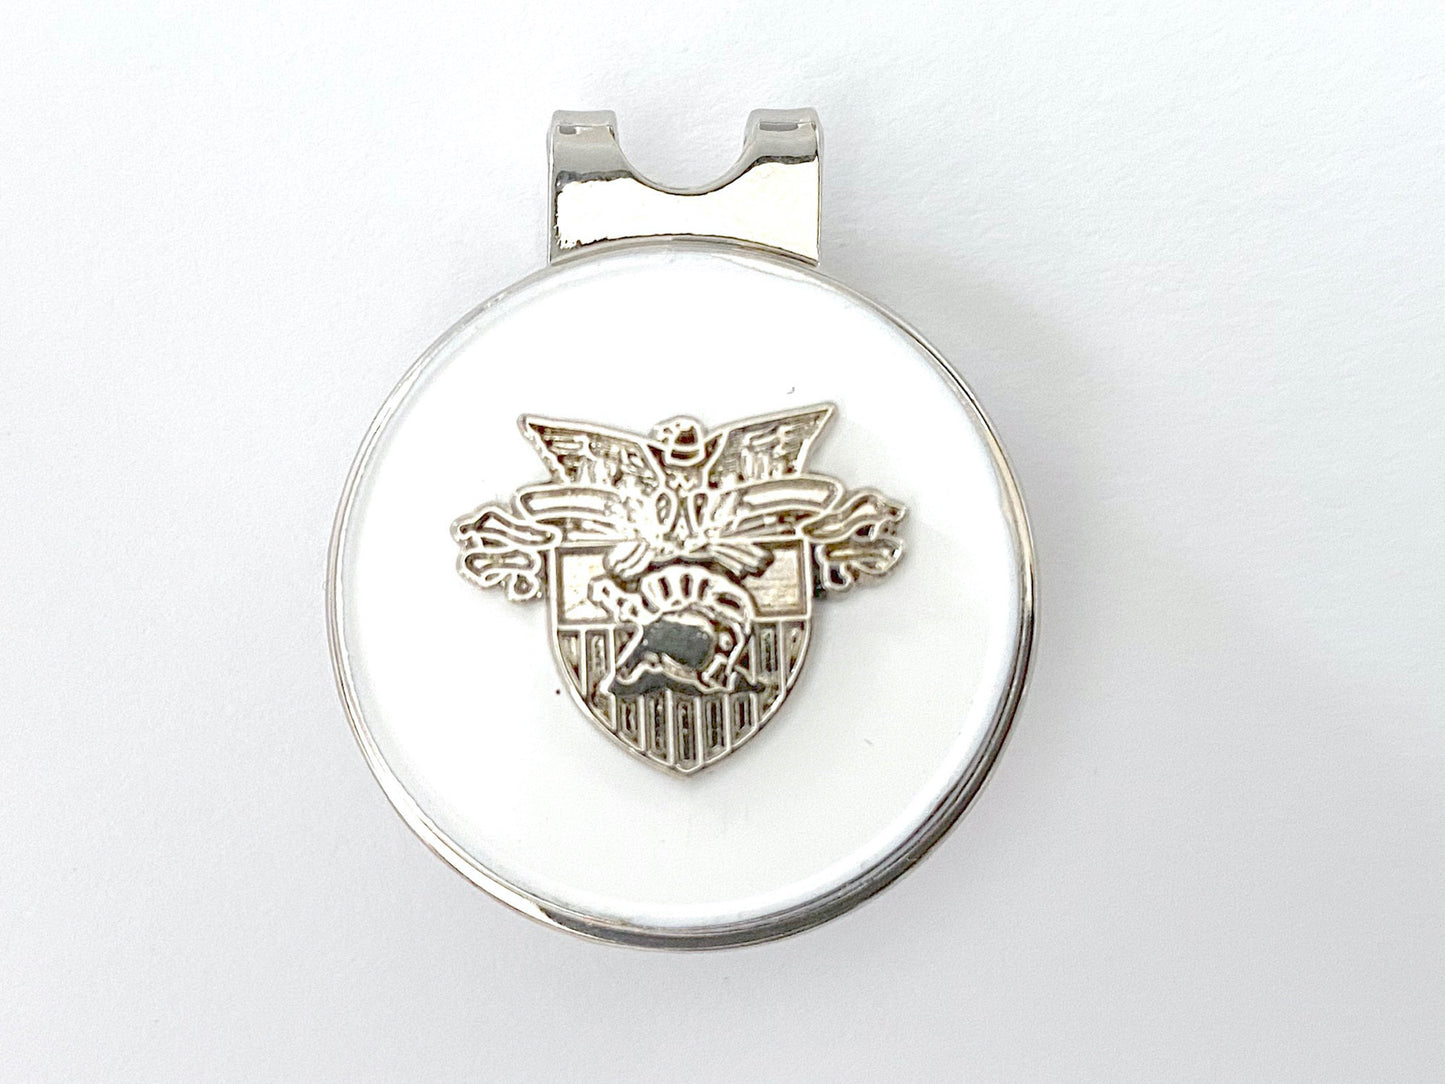 USMA Small Silver Crest Golf Divot Tool and Ball Marker